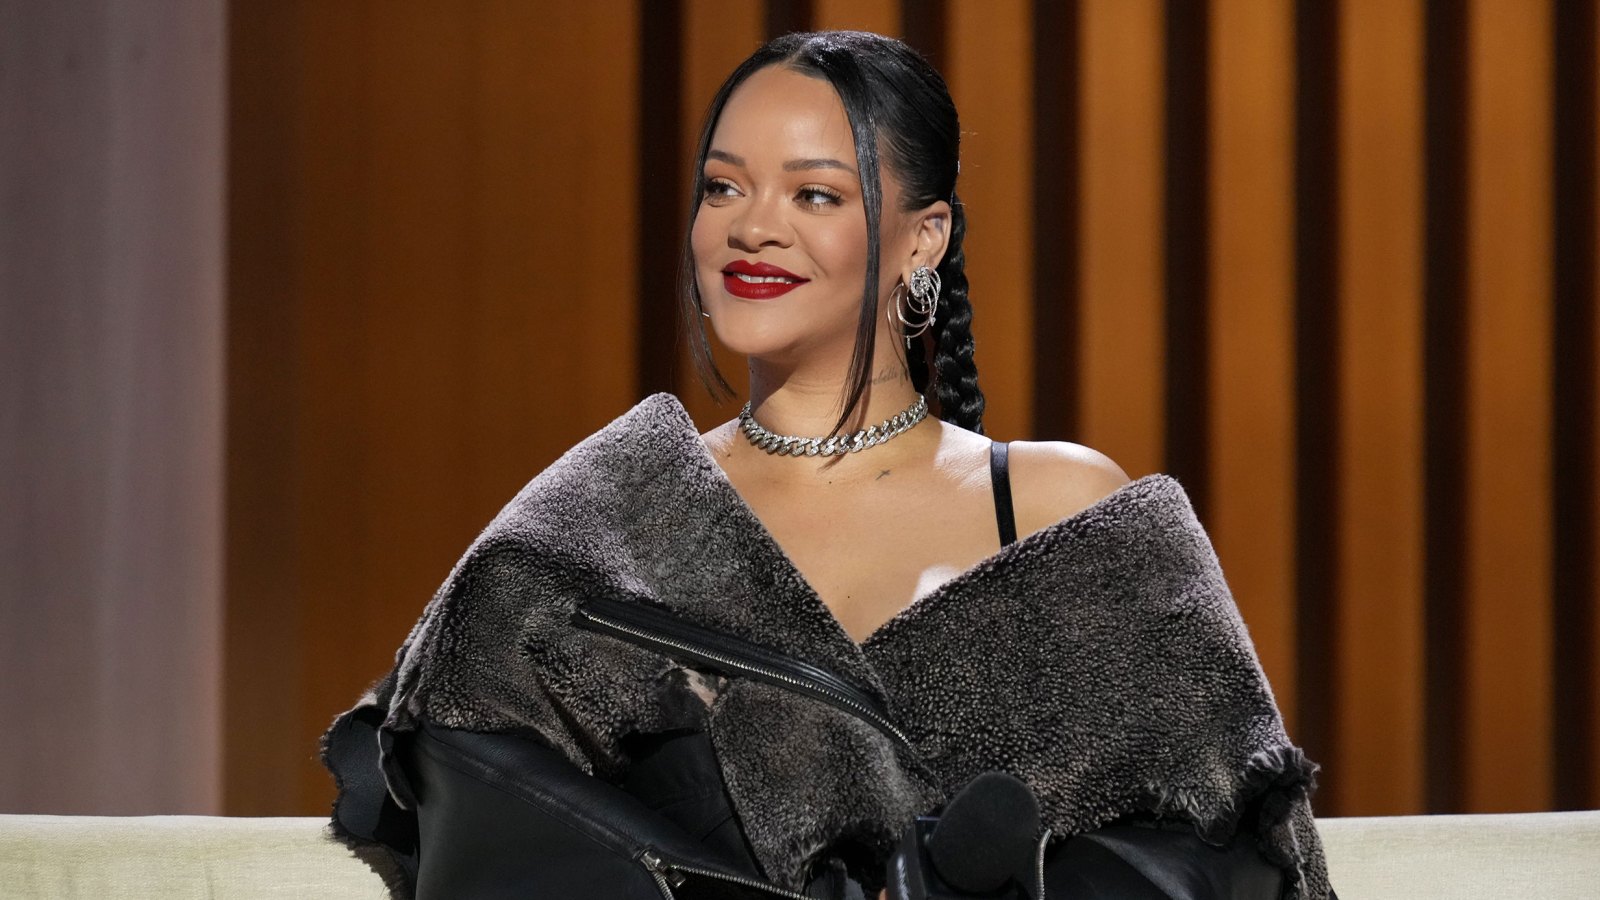 8 Lessons for launch success: Fenty Beauty